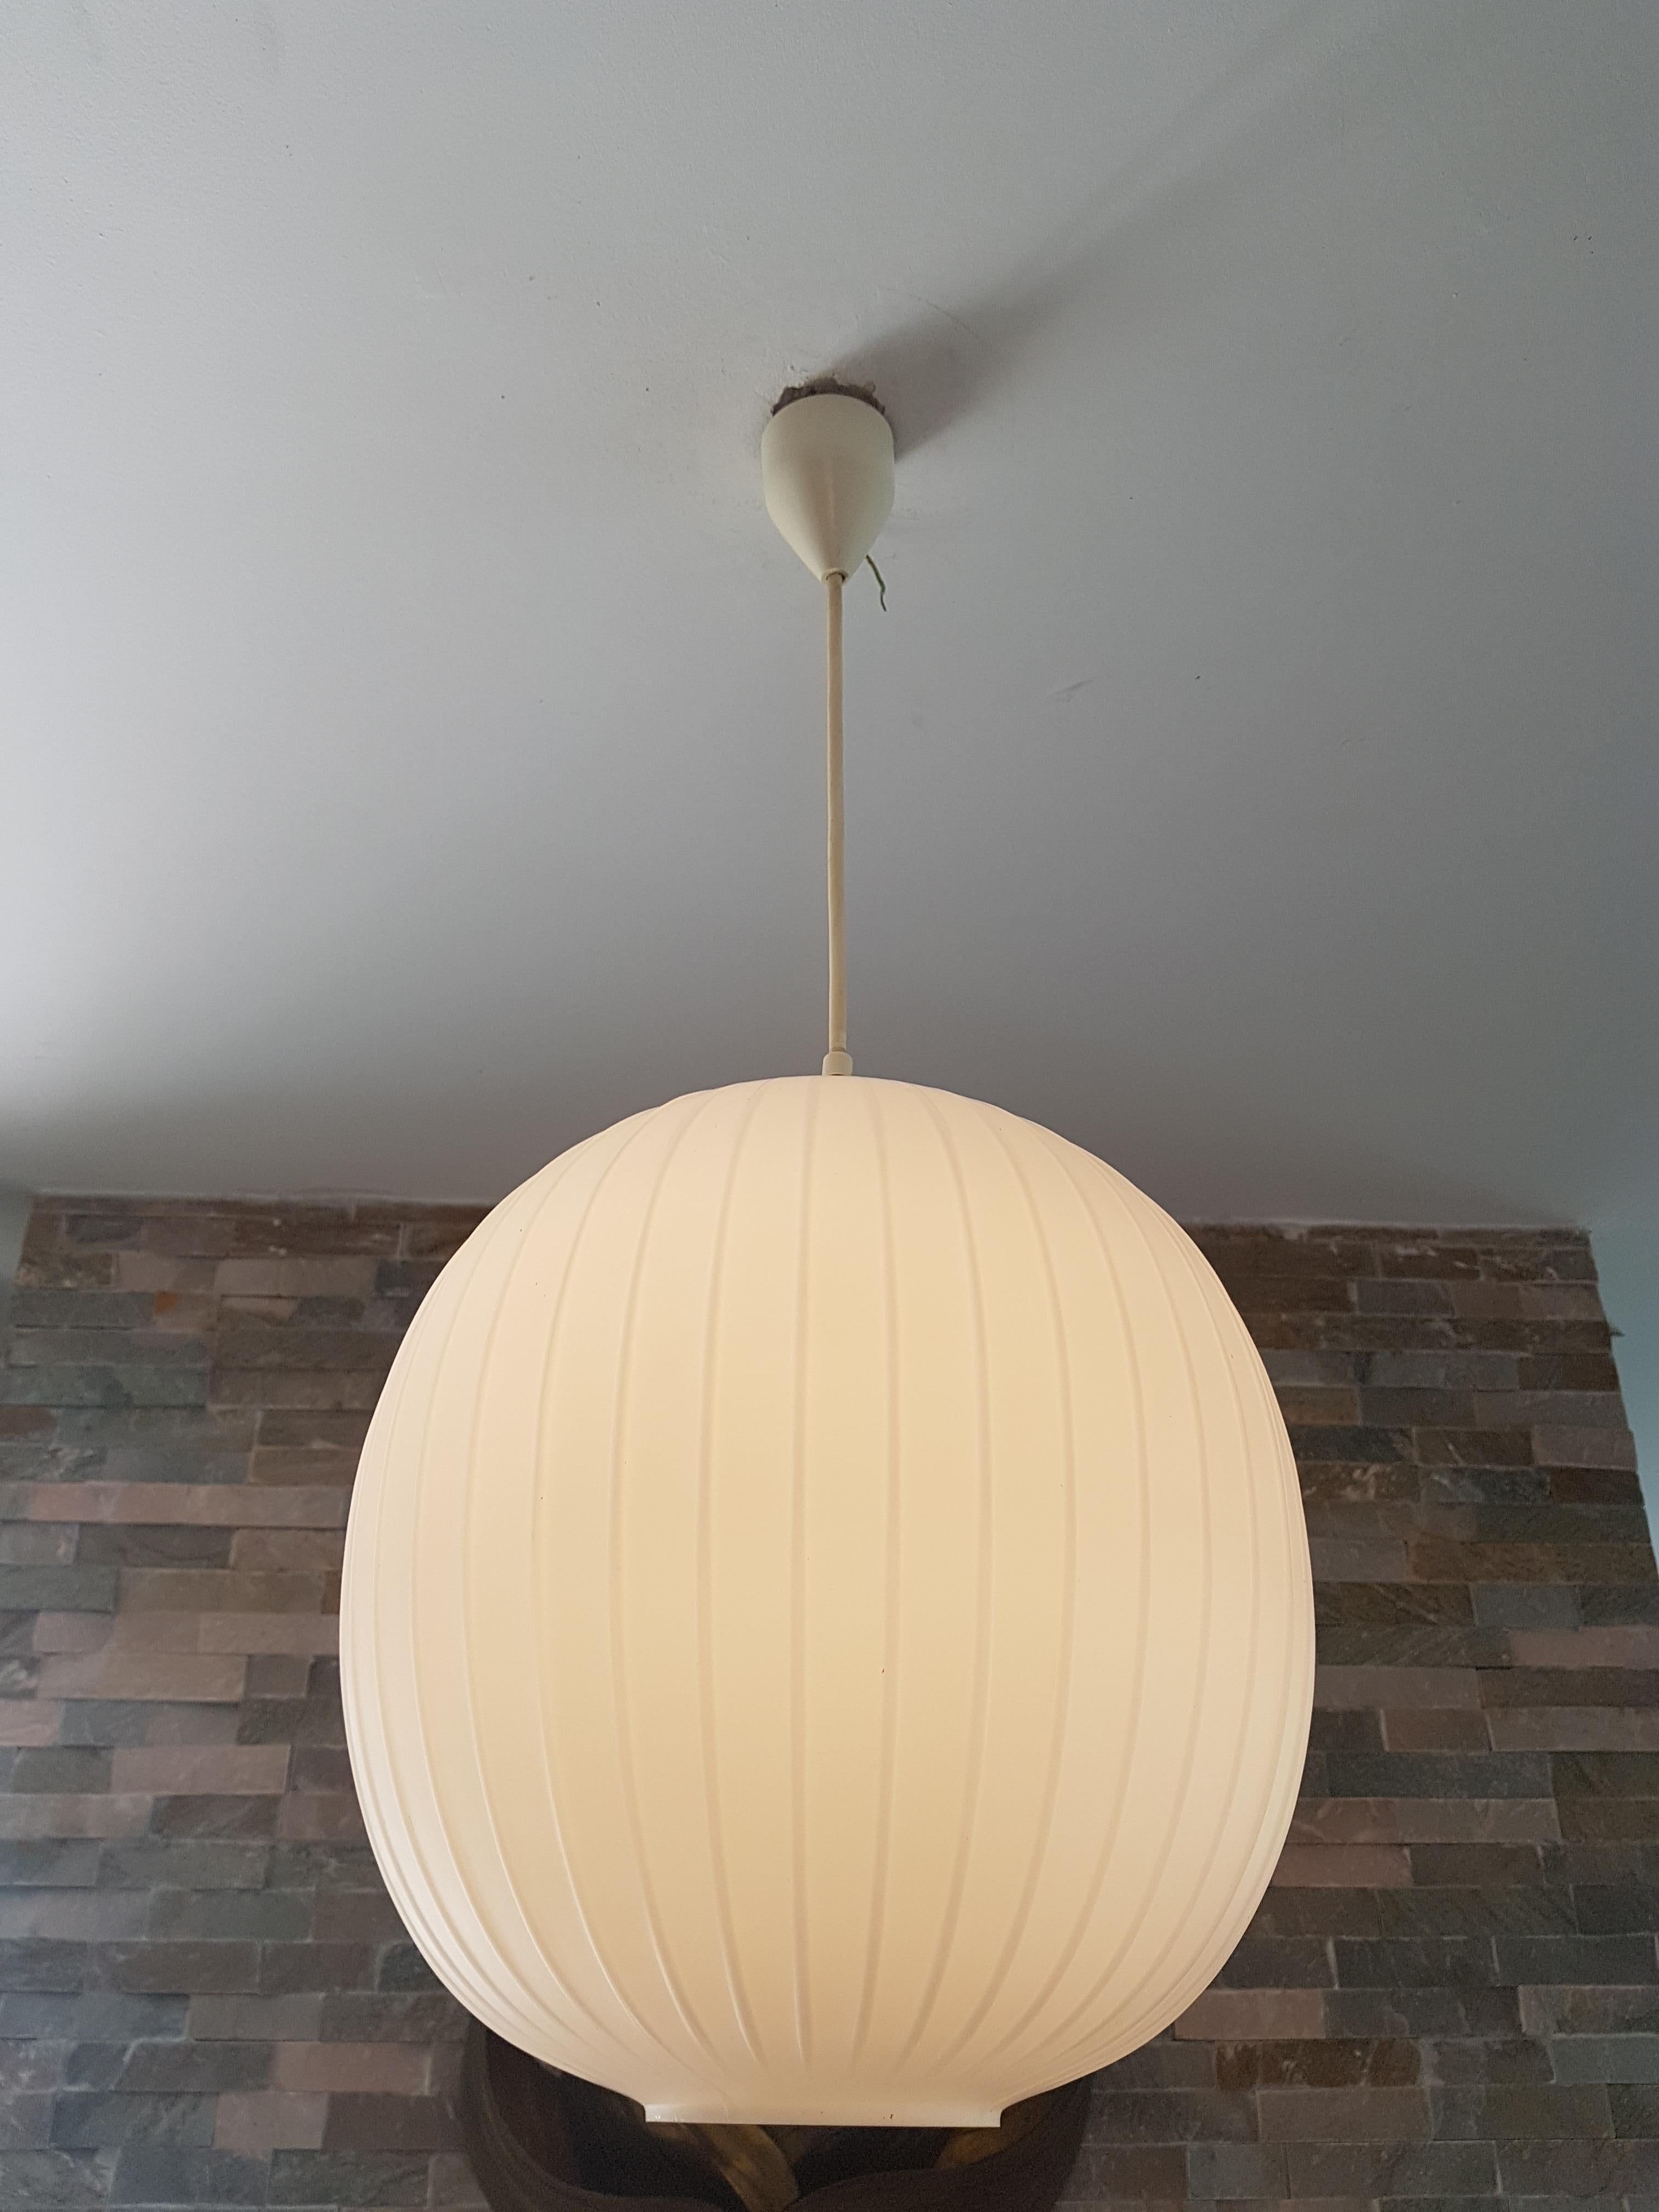 Midcentury Pendant Lamp Bologna by Gangkofner for Peill & Putzler, Germany, 1958 For Sale 13